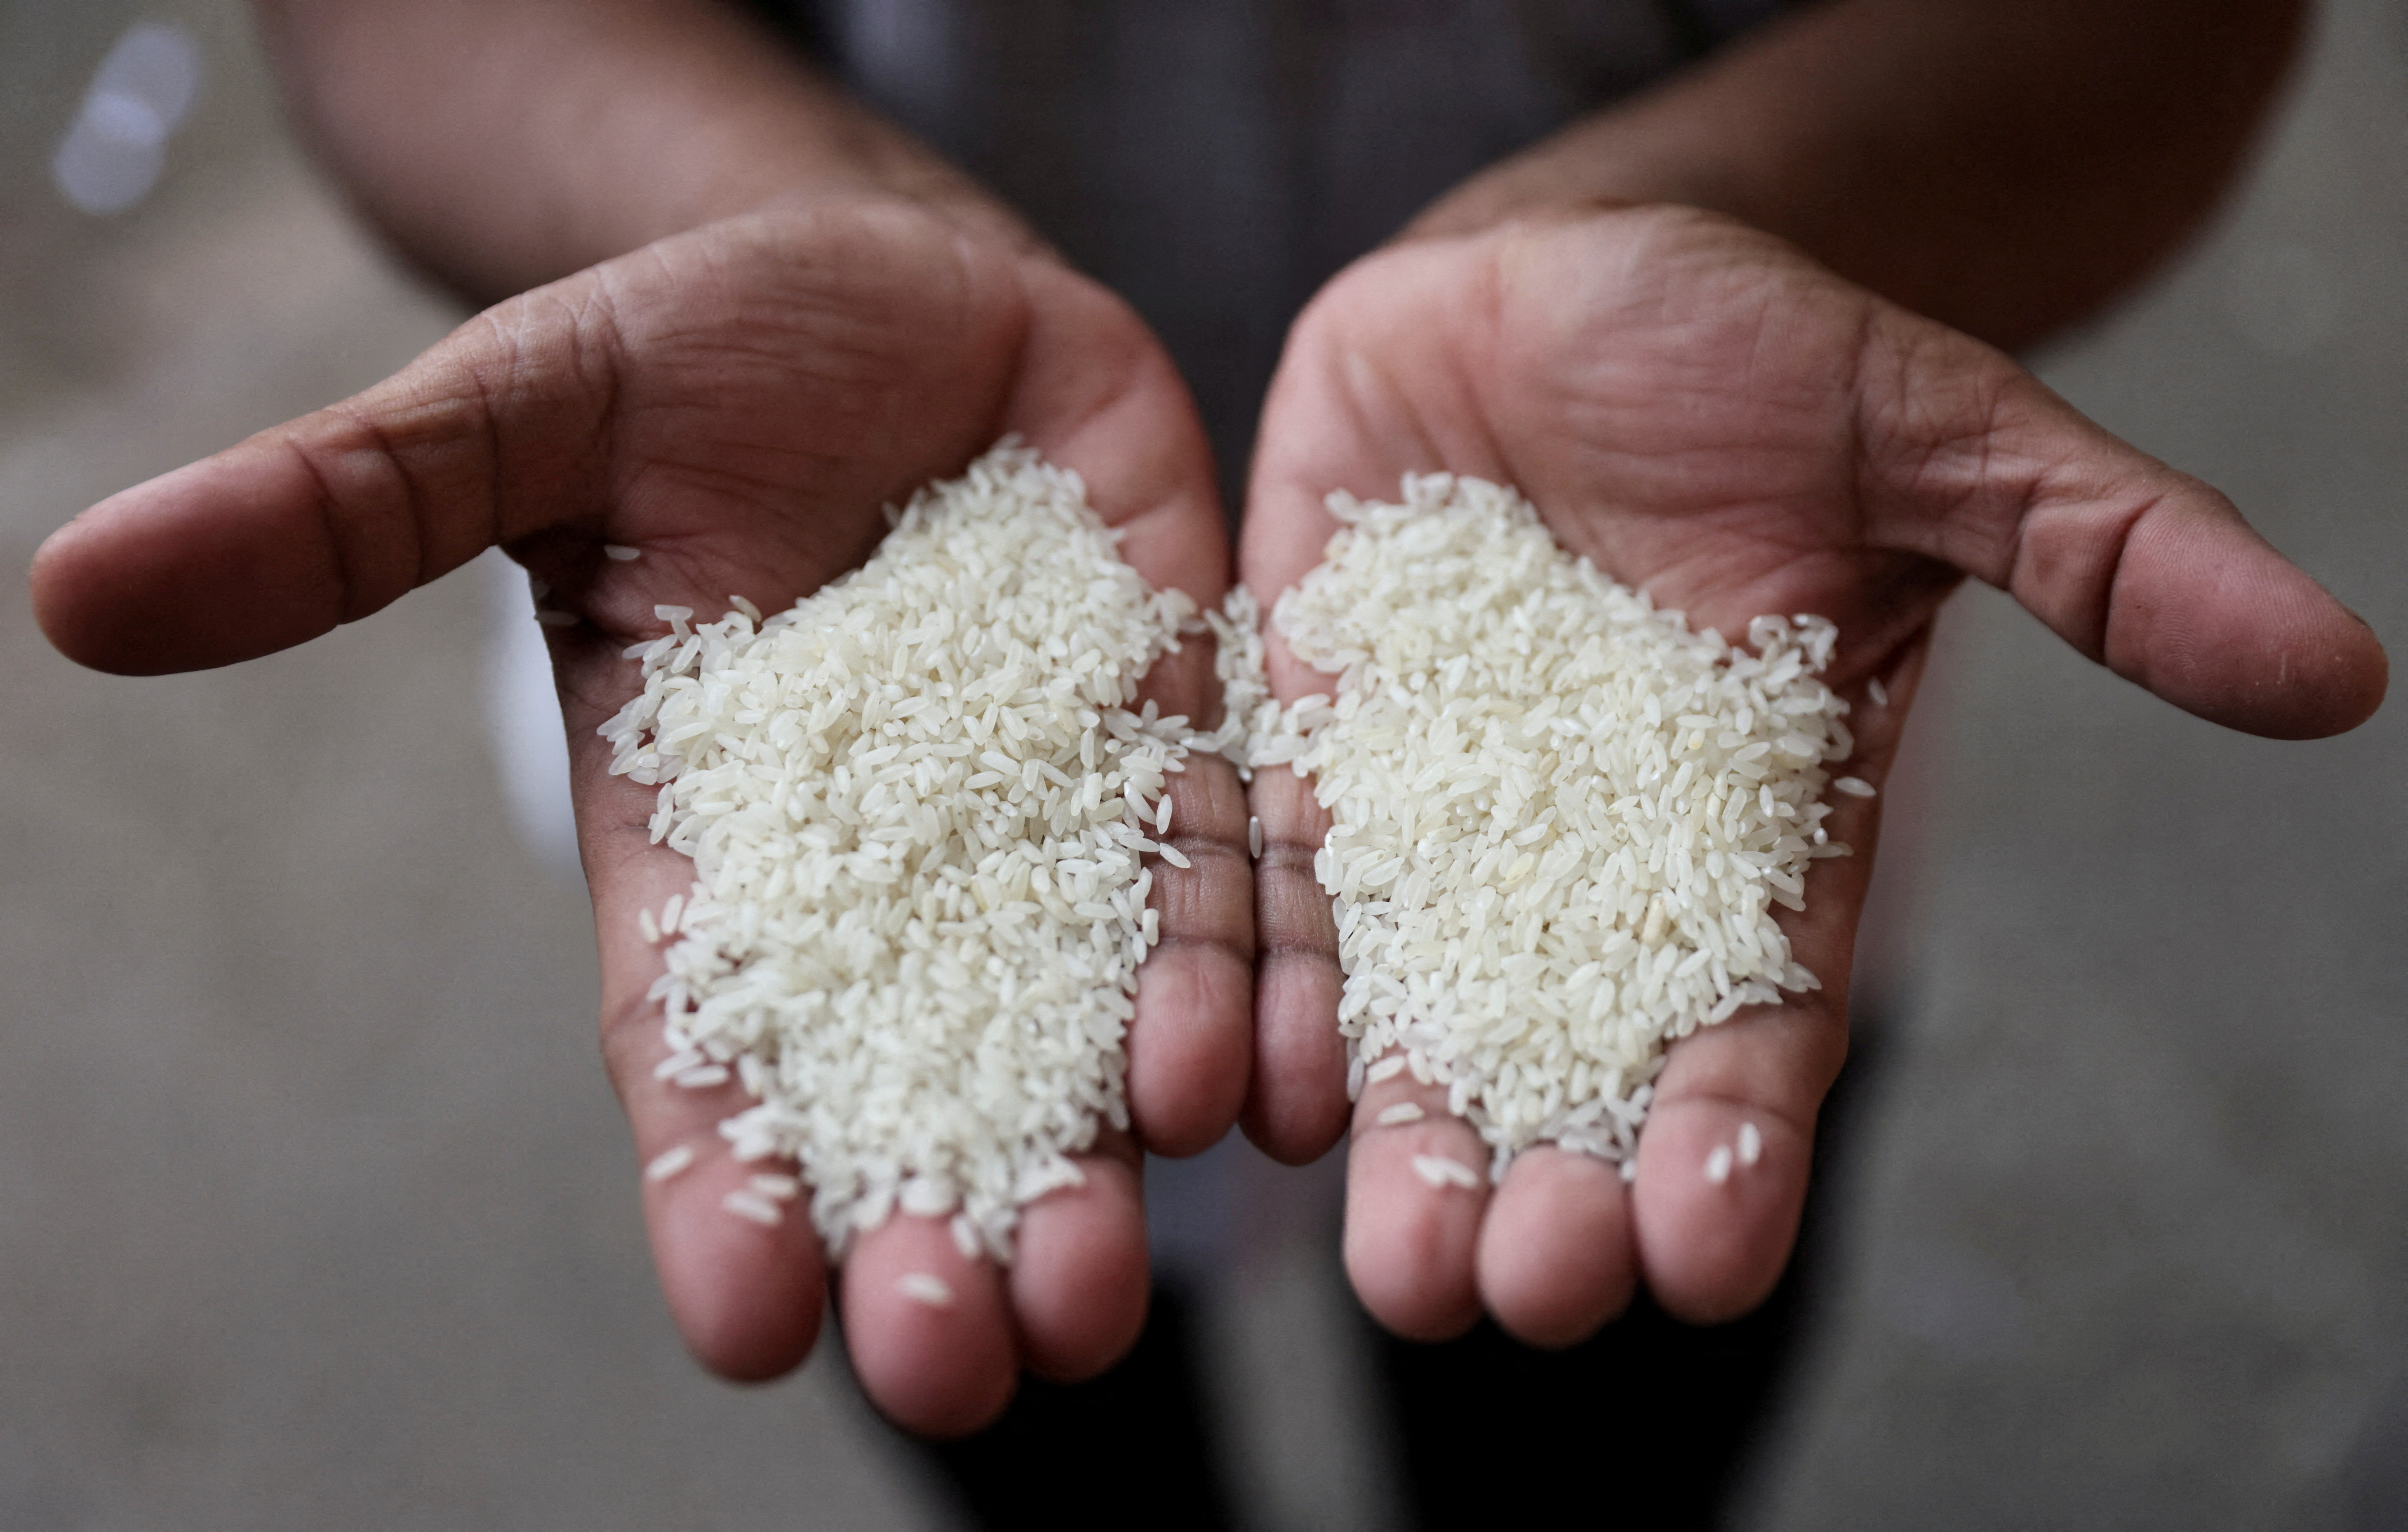 Man compares different grains of rice at a wholesale market in Navi Mumbai